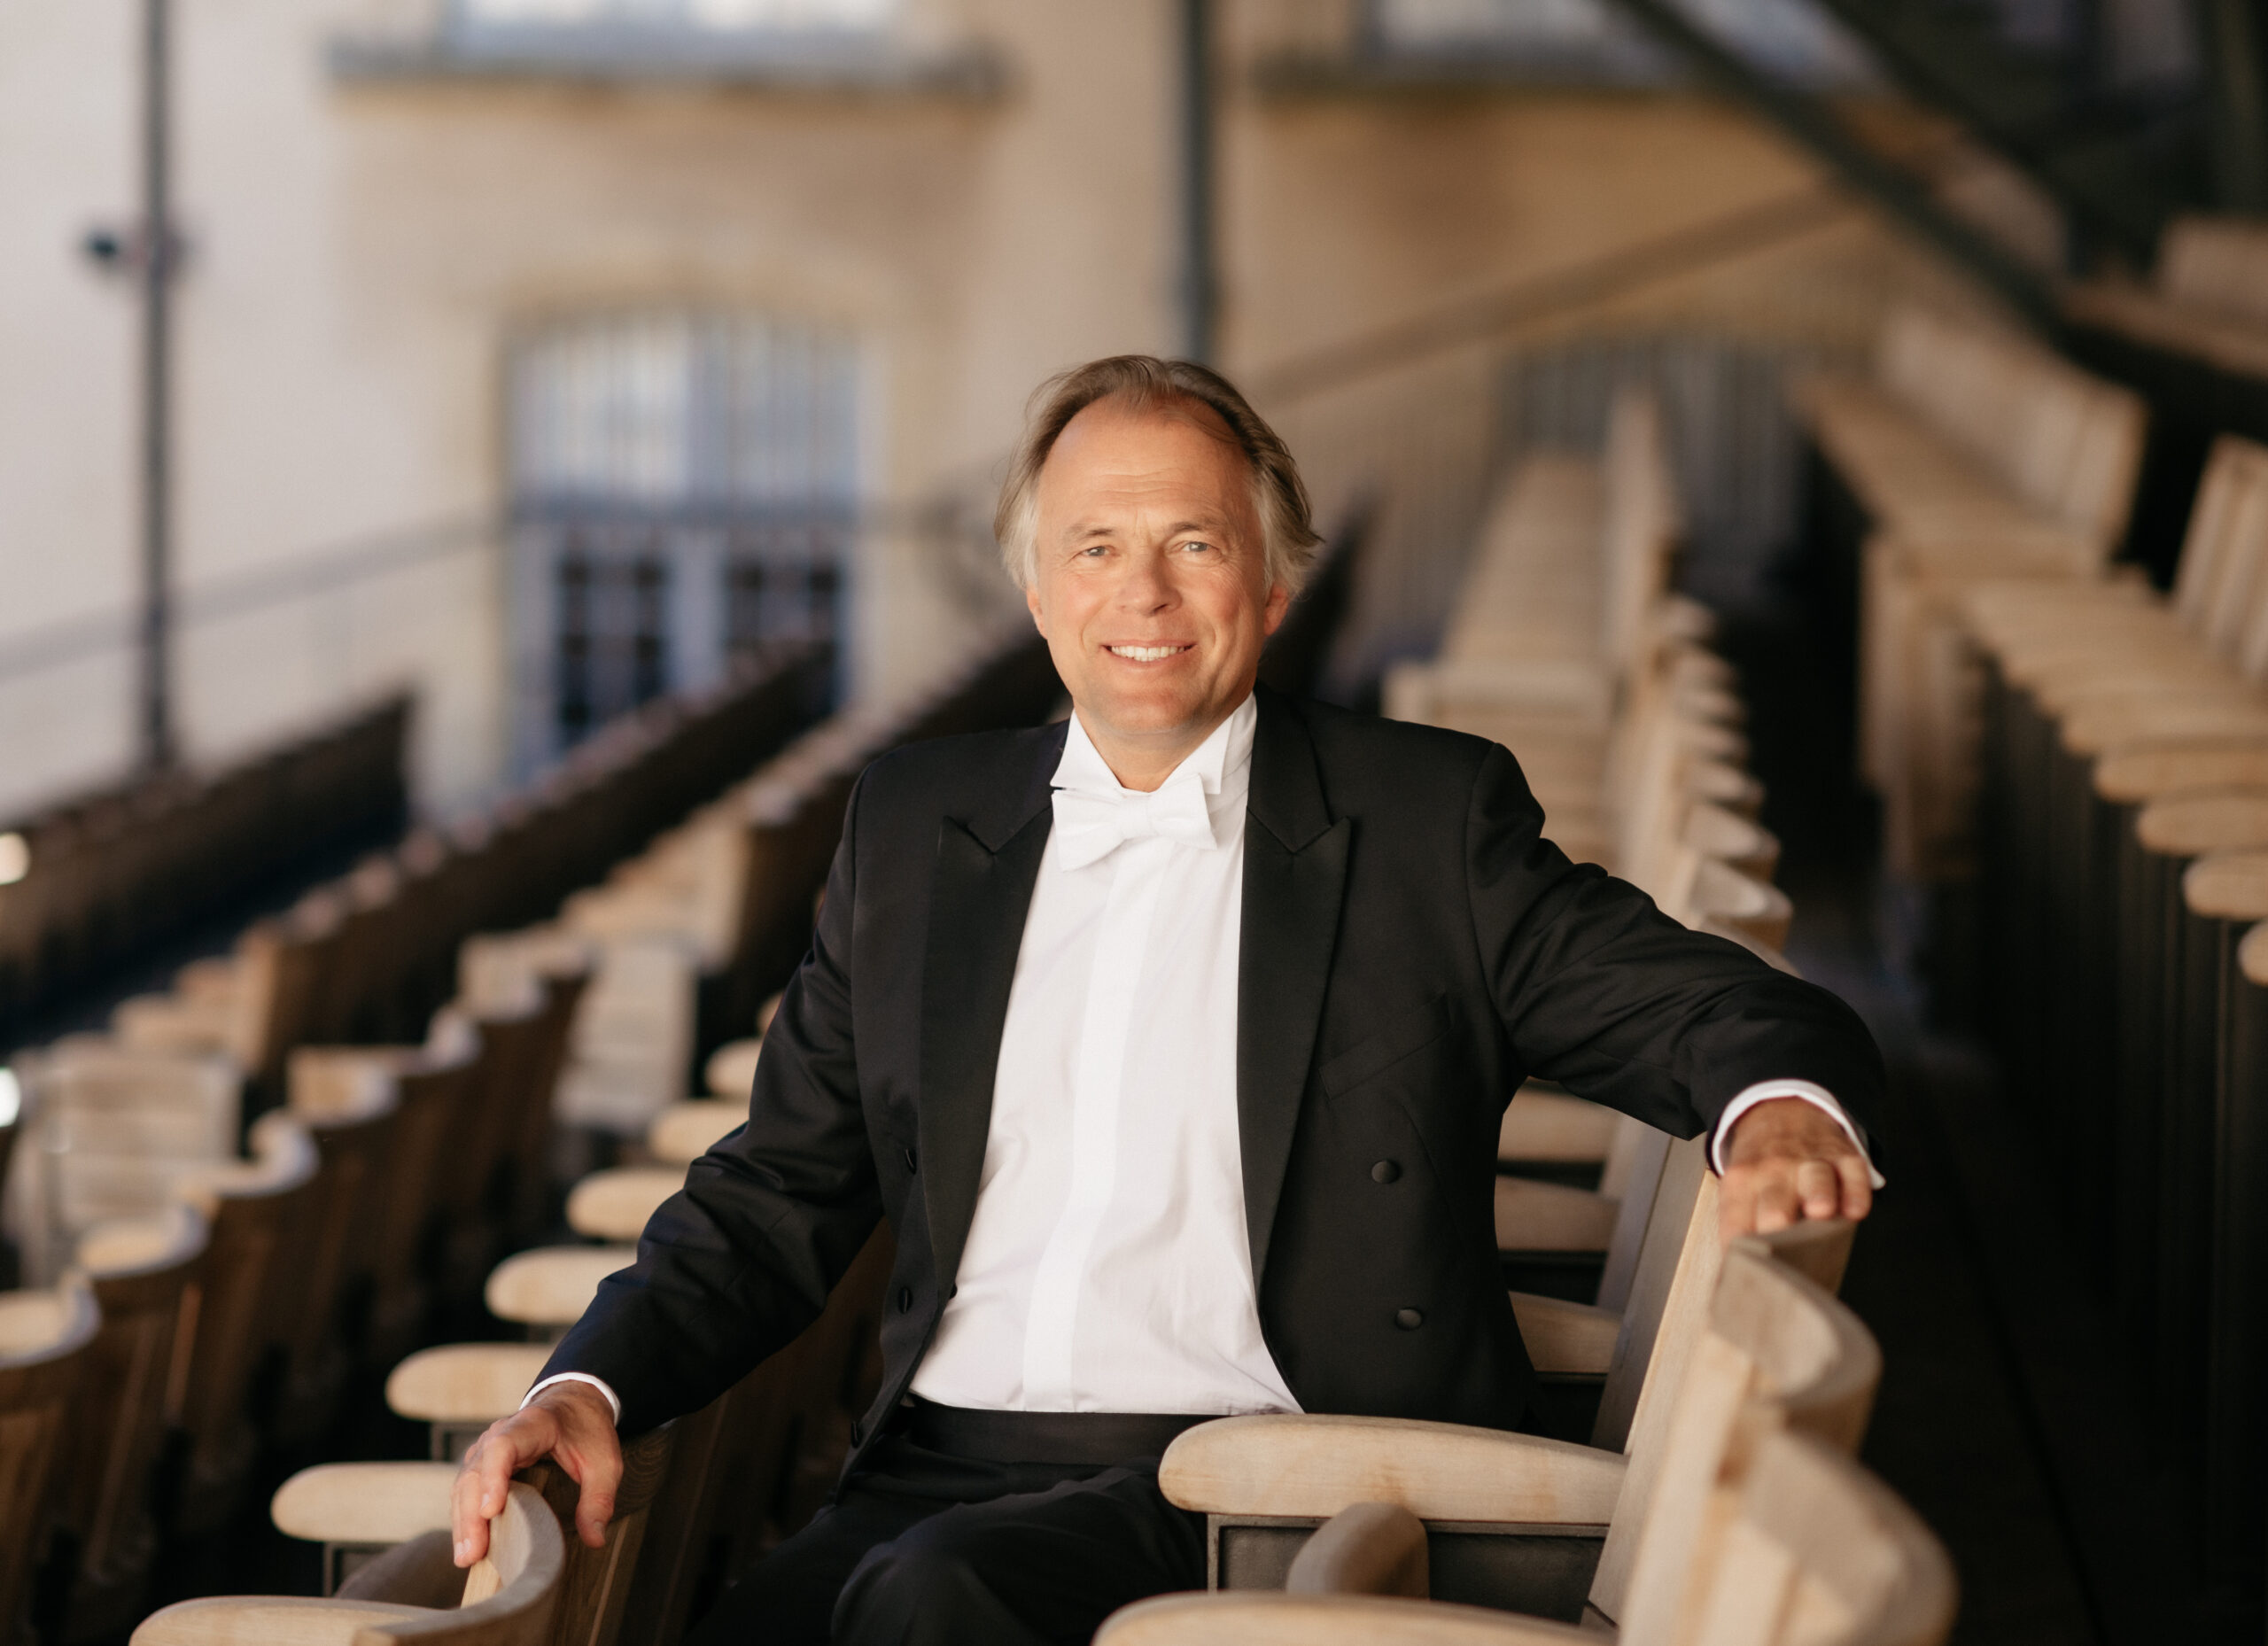 Conductor Thomas Hengelbrock sits in the auditorium and smiles at the camera
